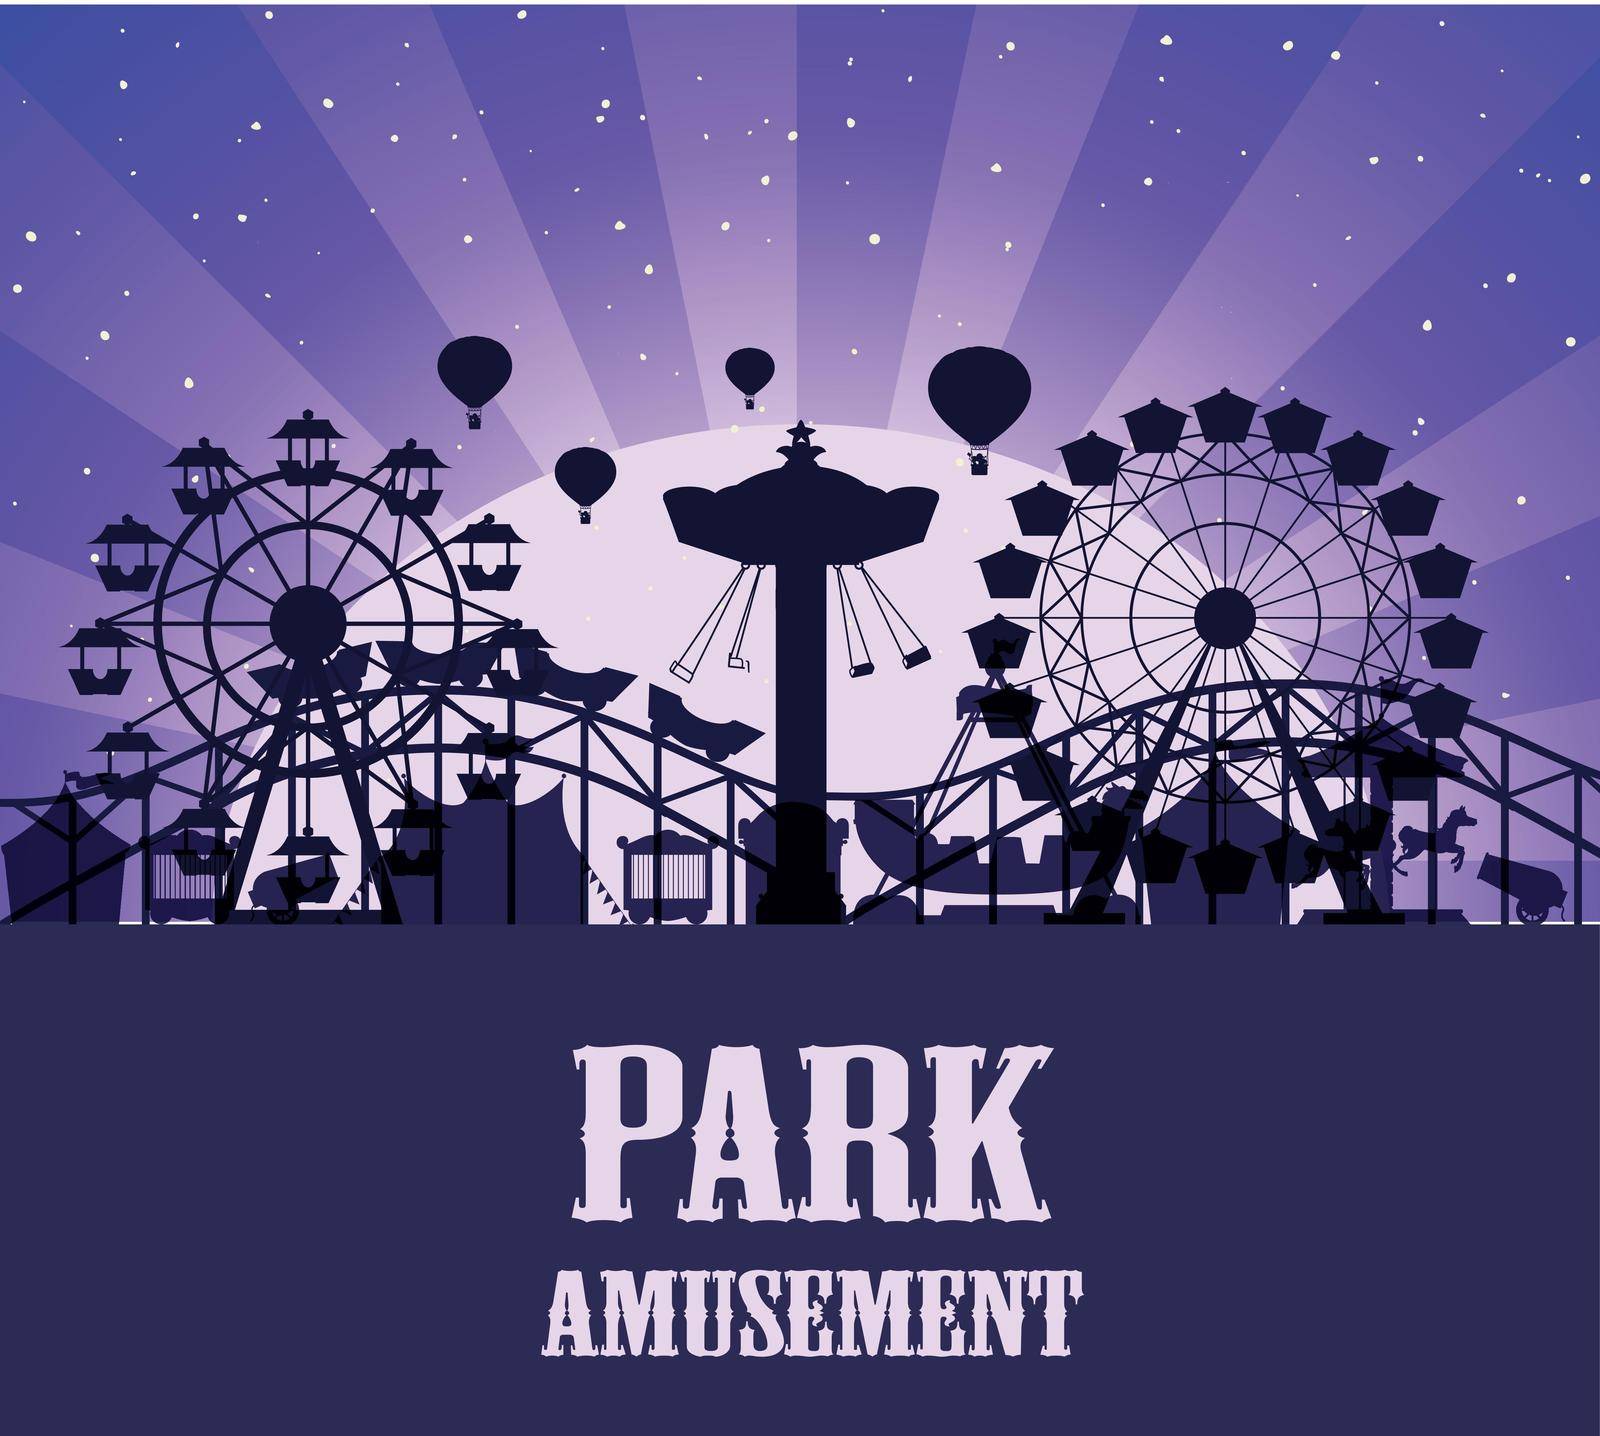 A silhouette amusement park template by iimages